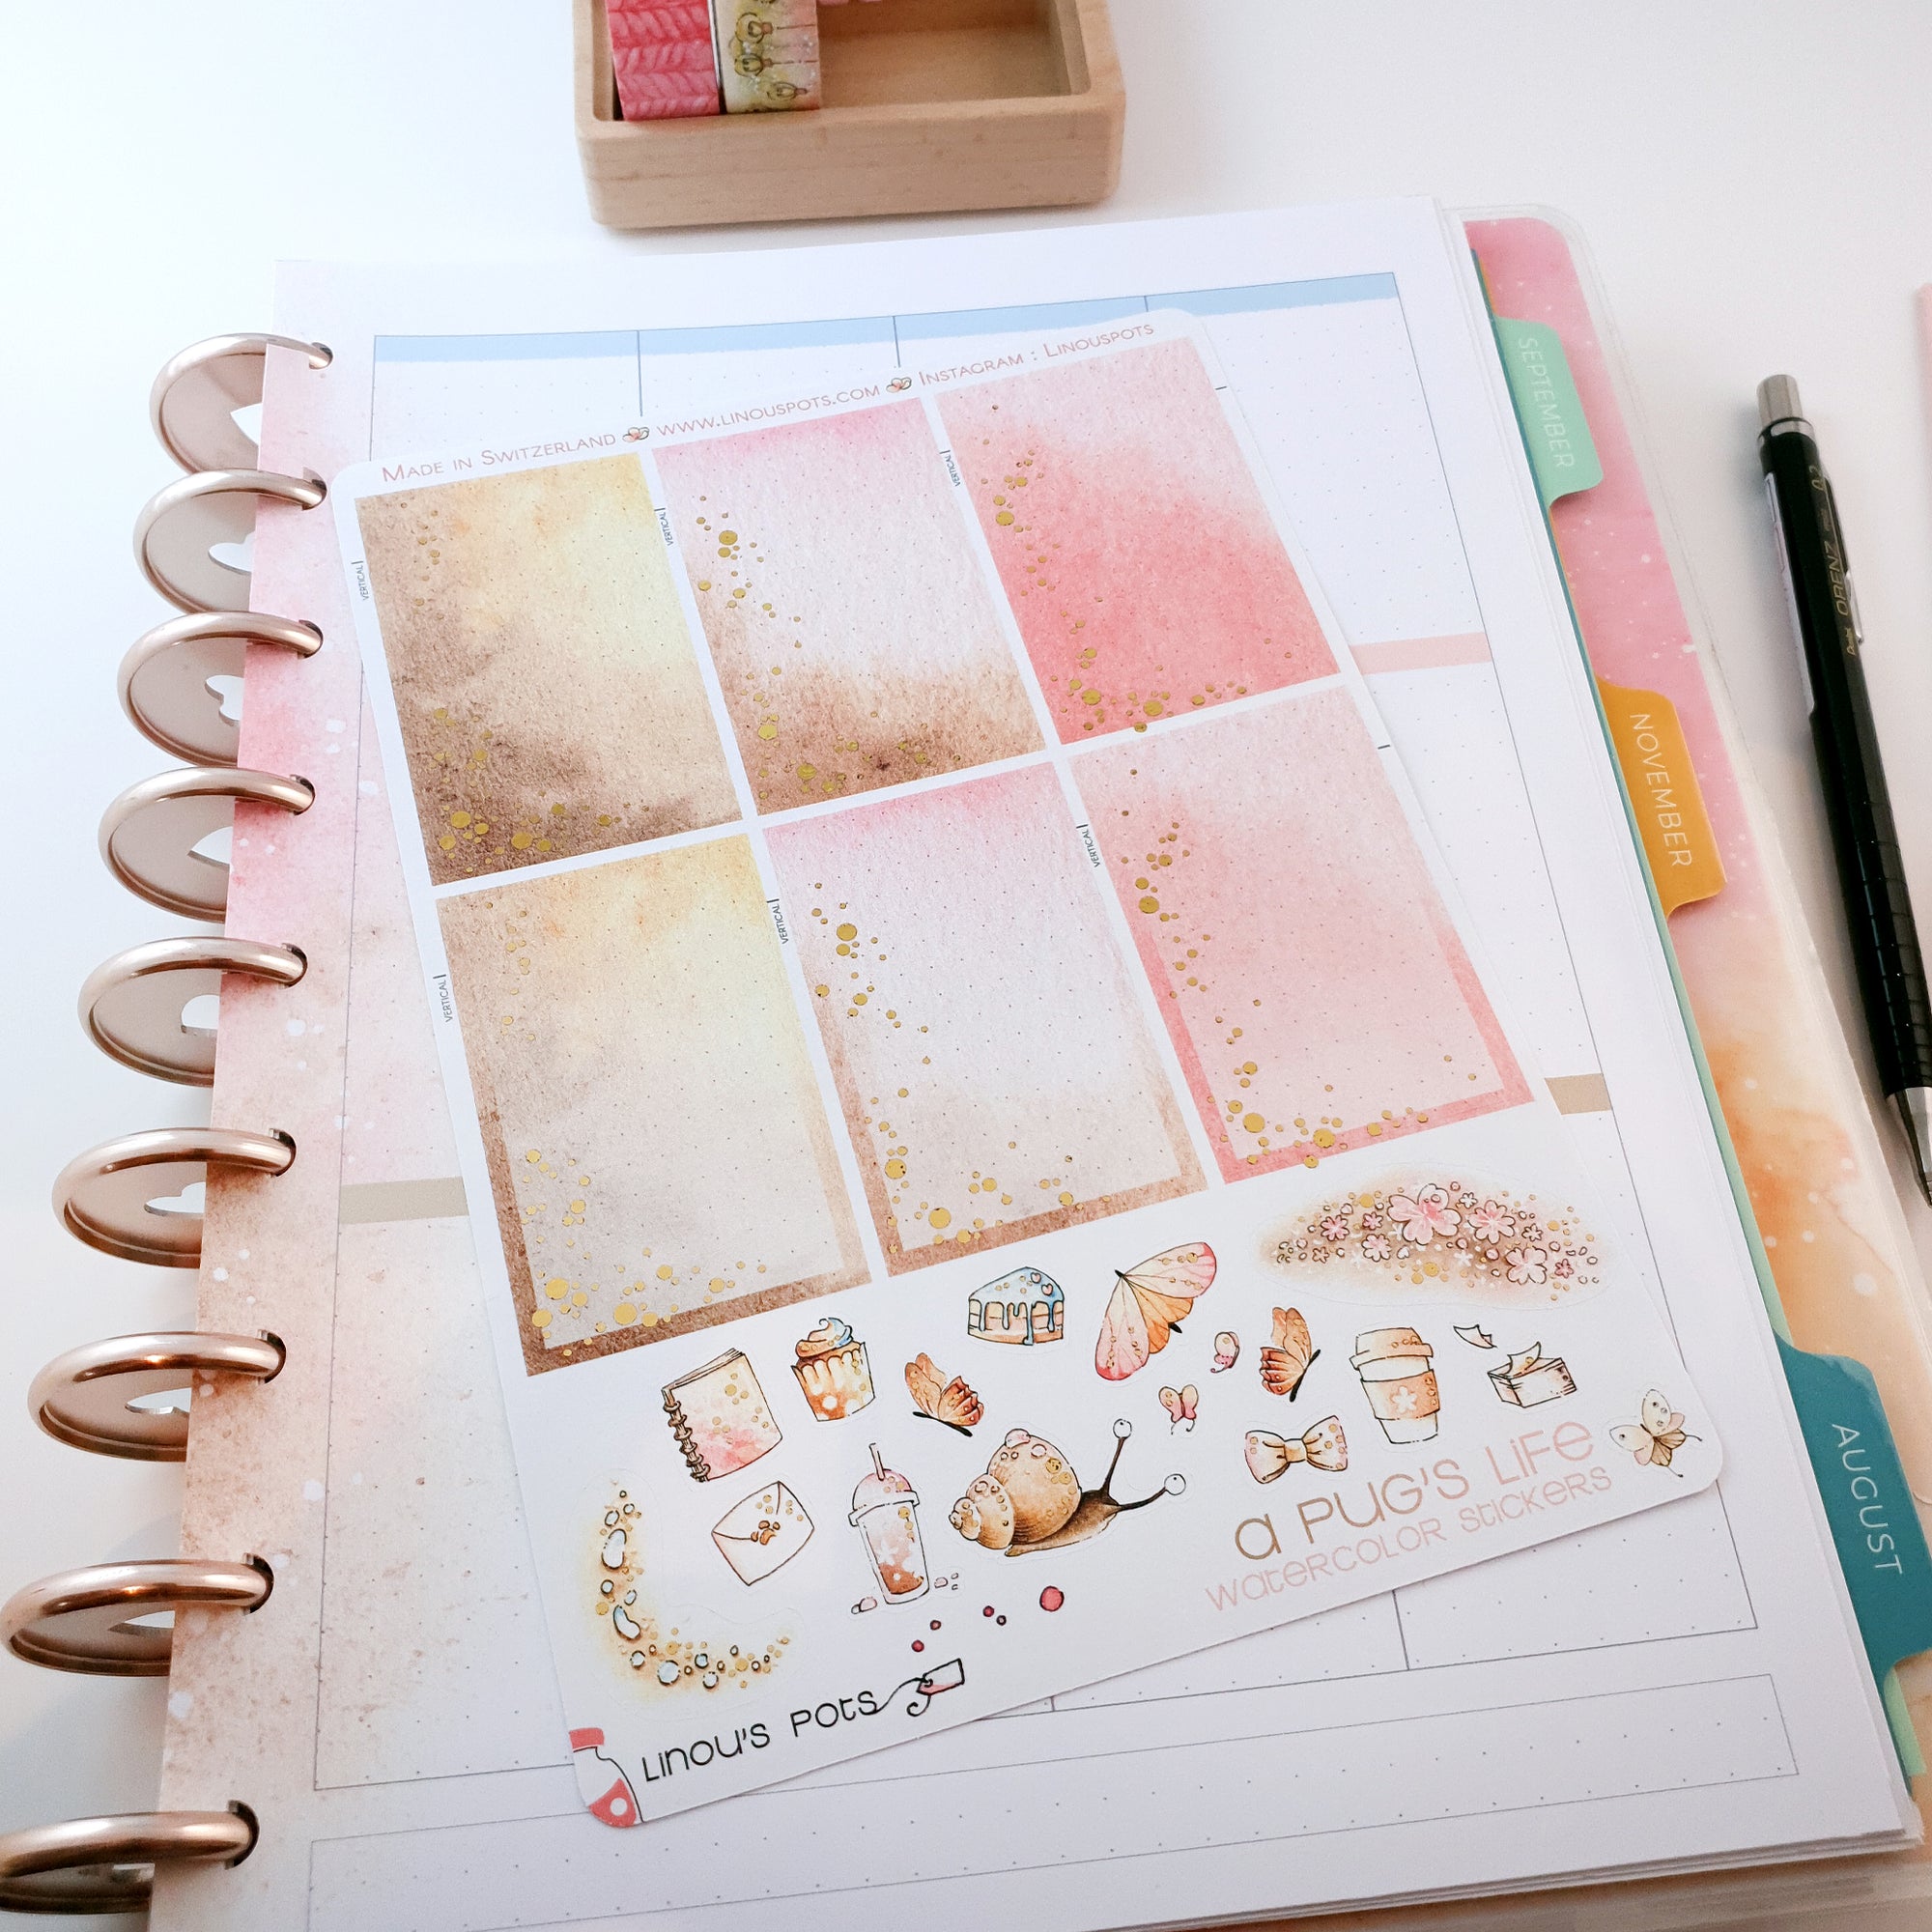 A Pug&#39;s Life - Watercolor Planner Stickers - Foiled 1,5’’ Fullboxes Pink ✨